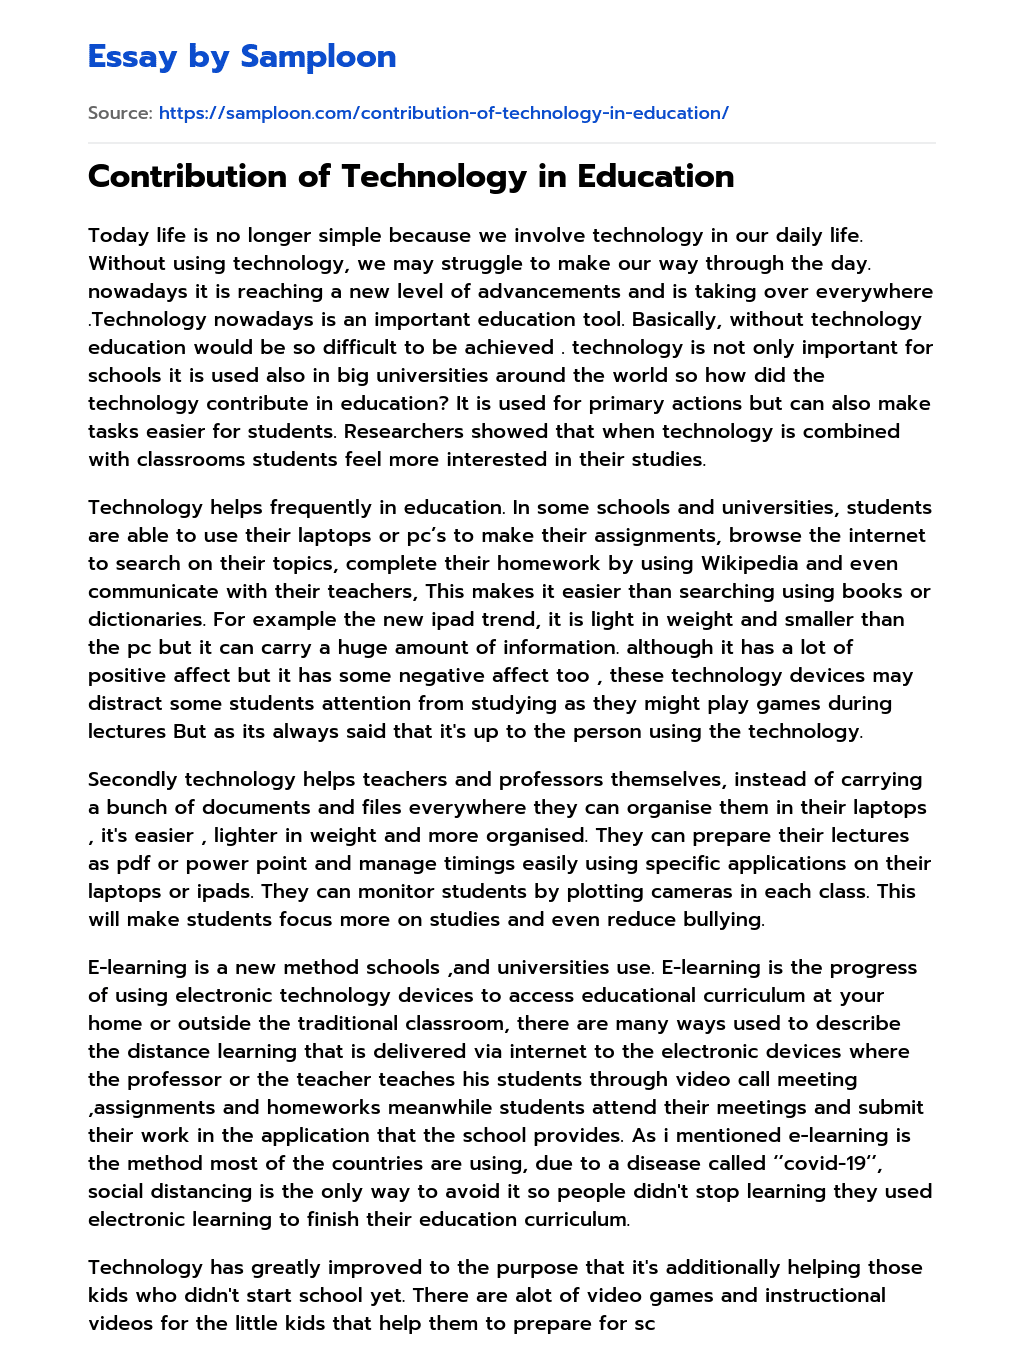 essay on contribution of technology in education during covid 19